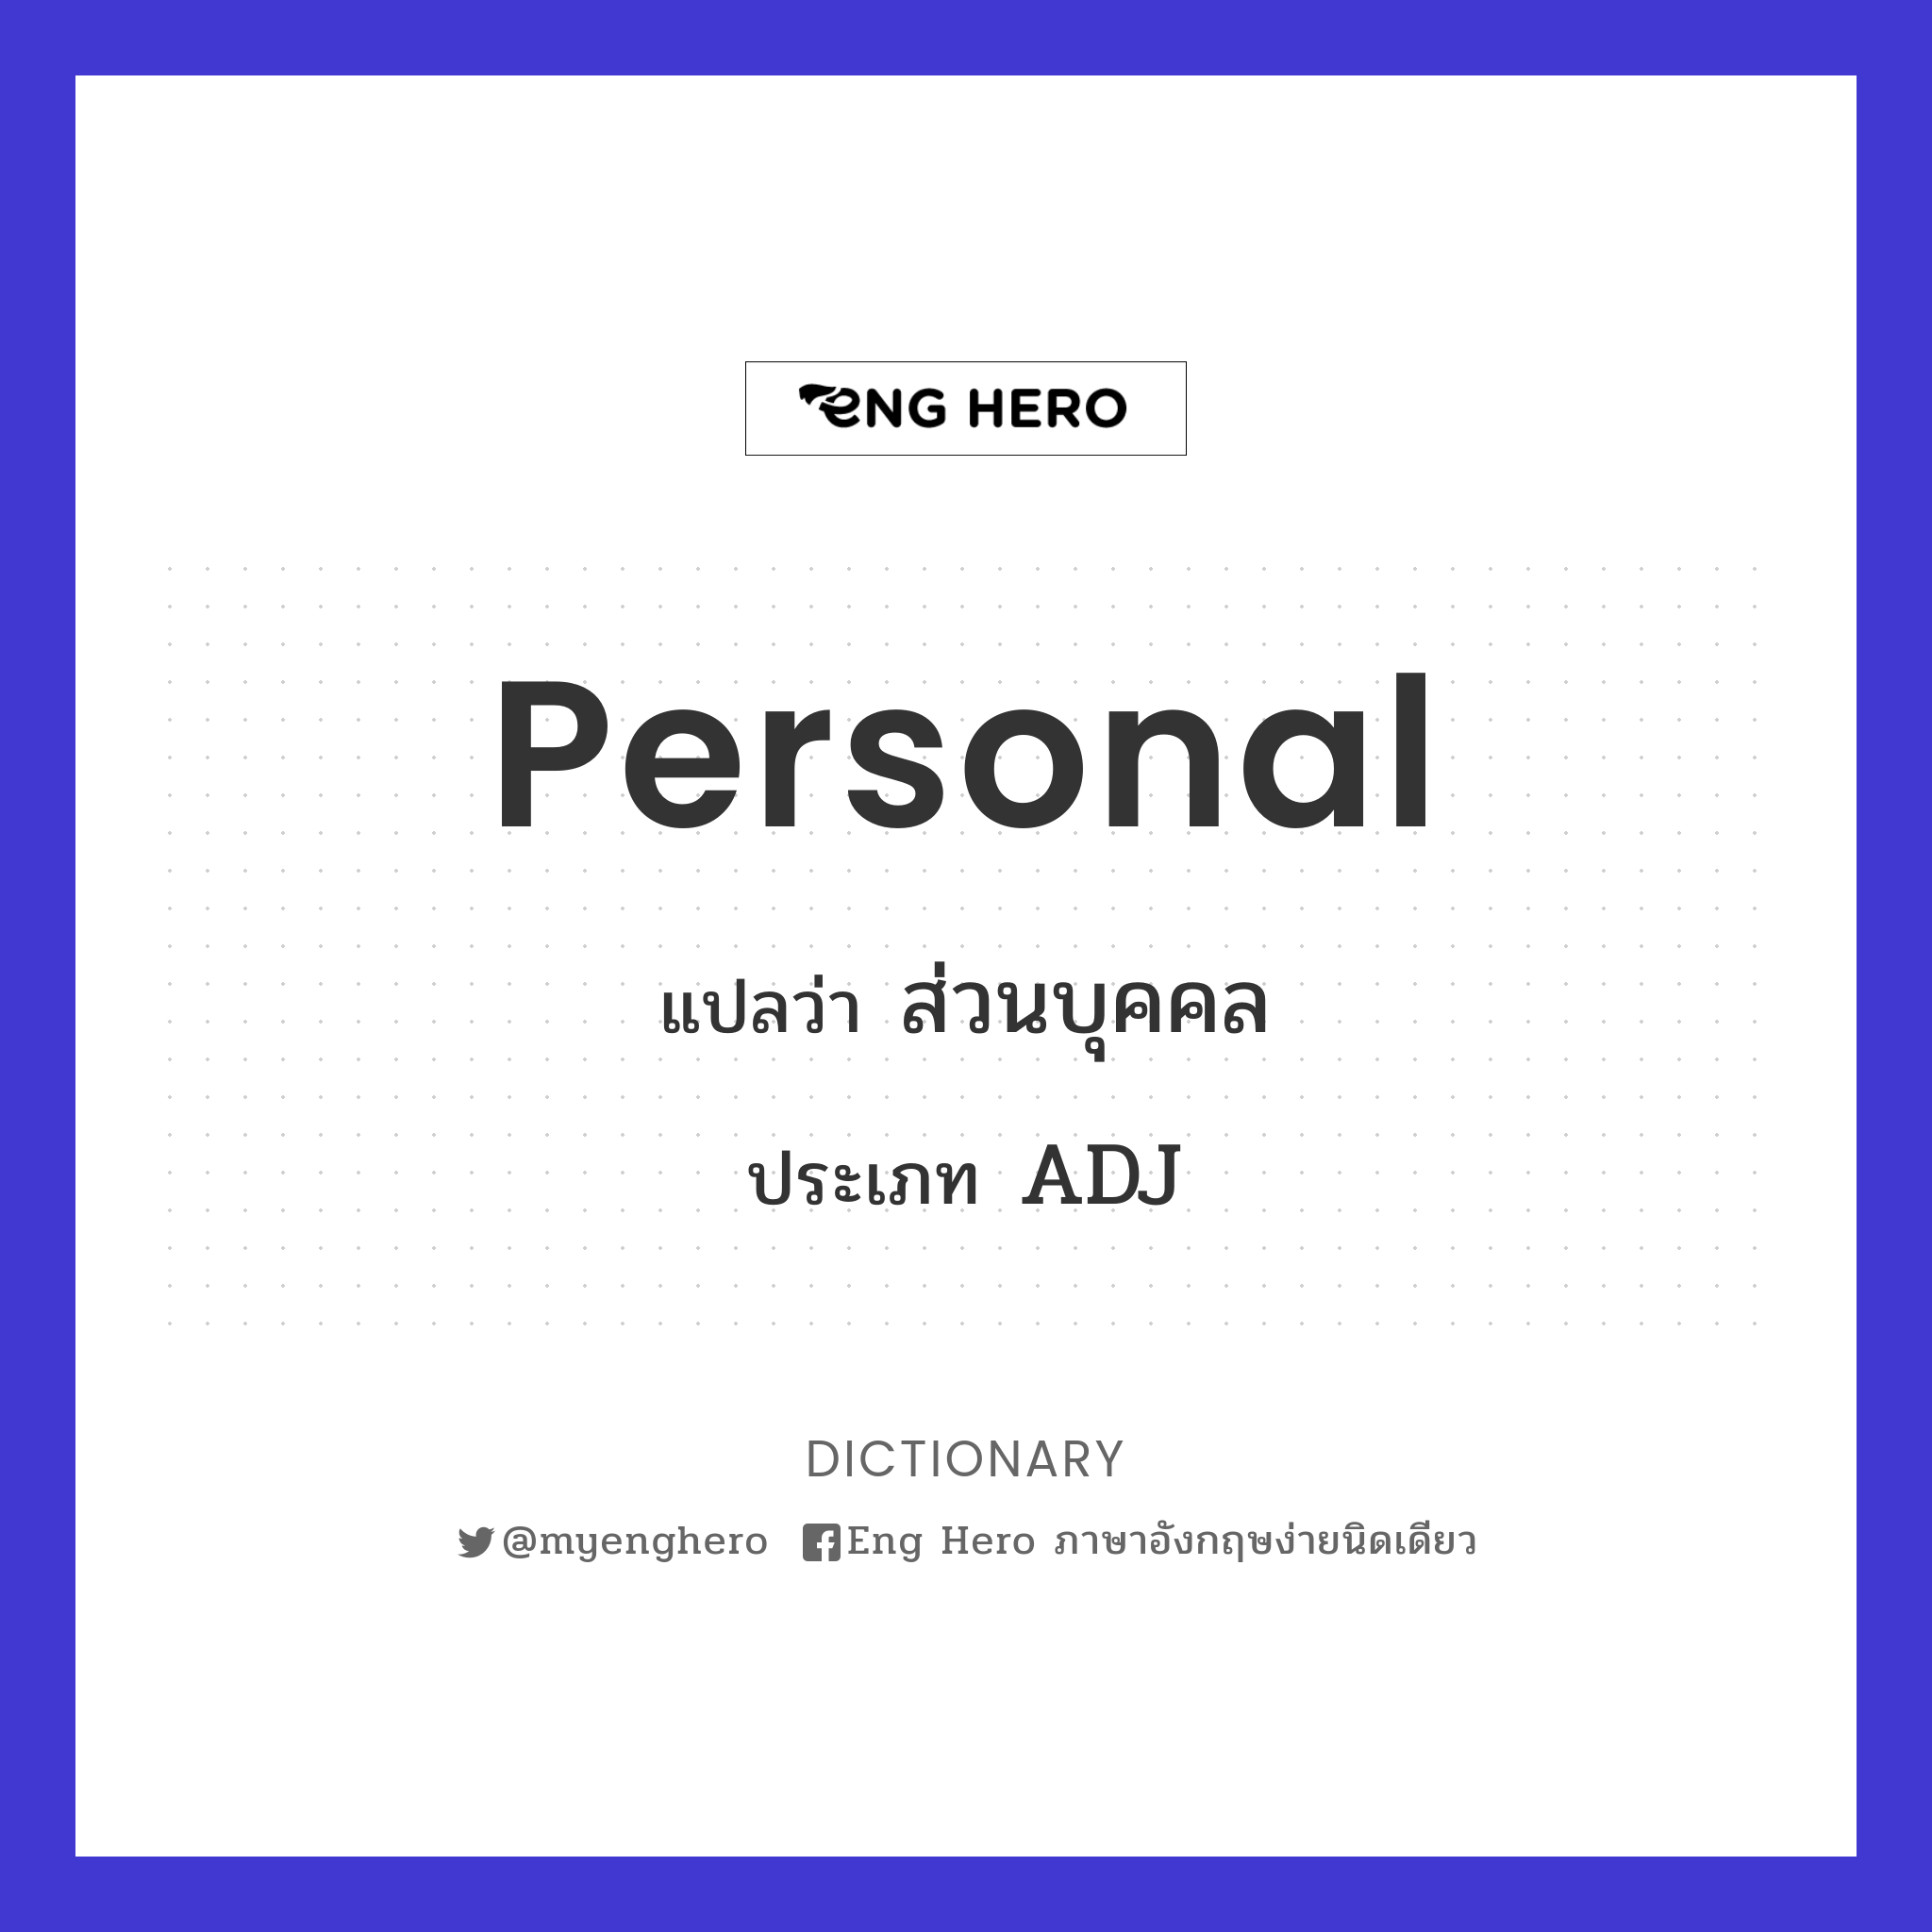 personal